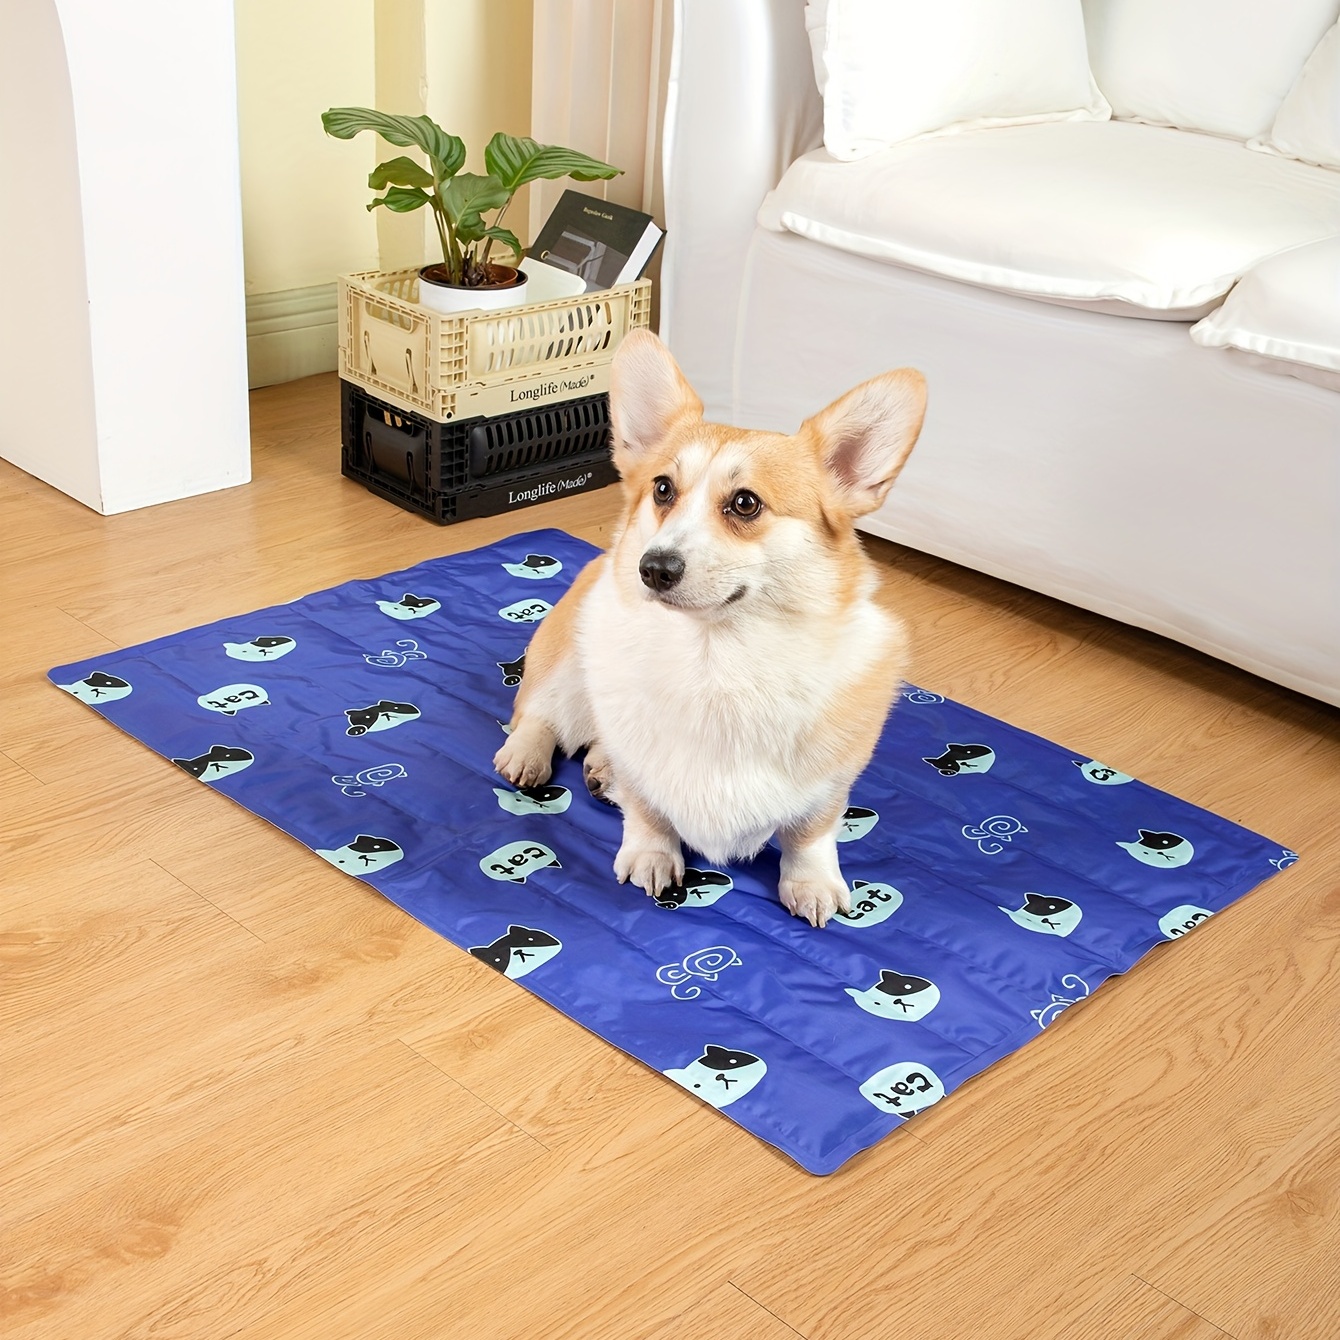 Mat Thick Cooling Pad for Summer Cool Feeling Matress Pad Soft Air-Permeable  Cold Summer Mat for Bed Queen King Size Room Decor - AliExpress